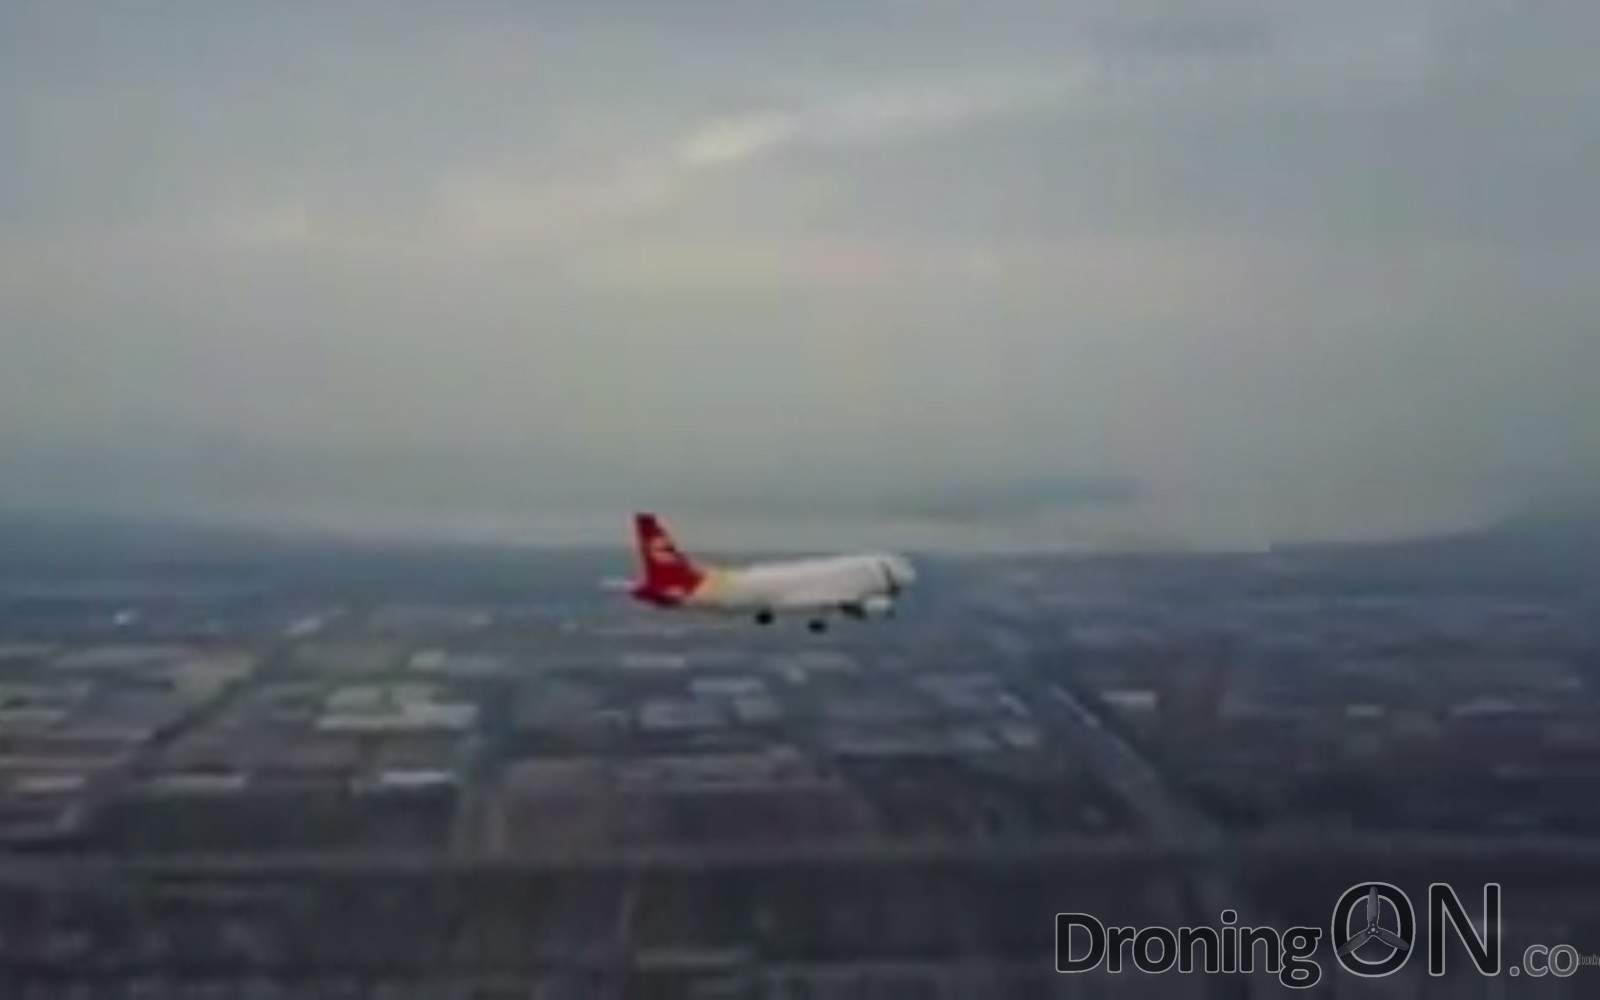 A drone pilot has been arrested in China for allegedly flying his drone in close proximity to passenger airliners.